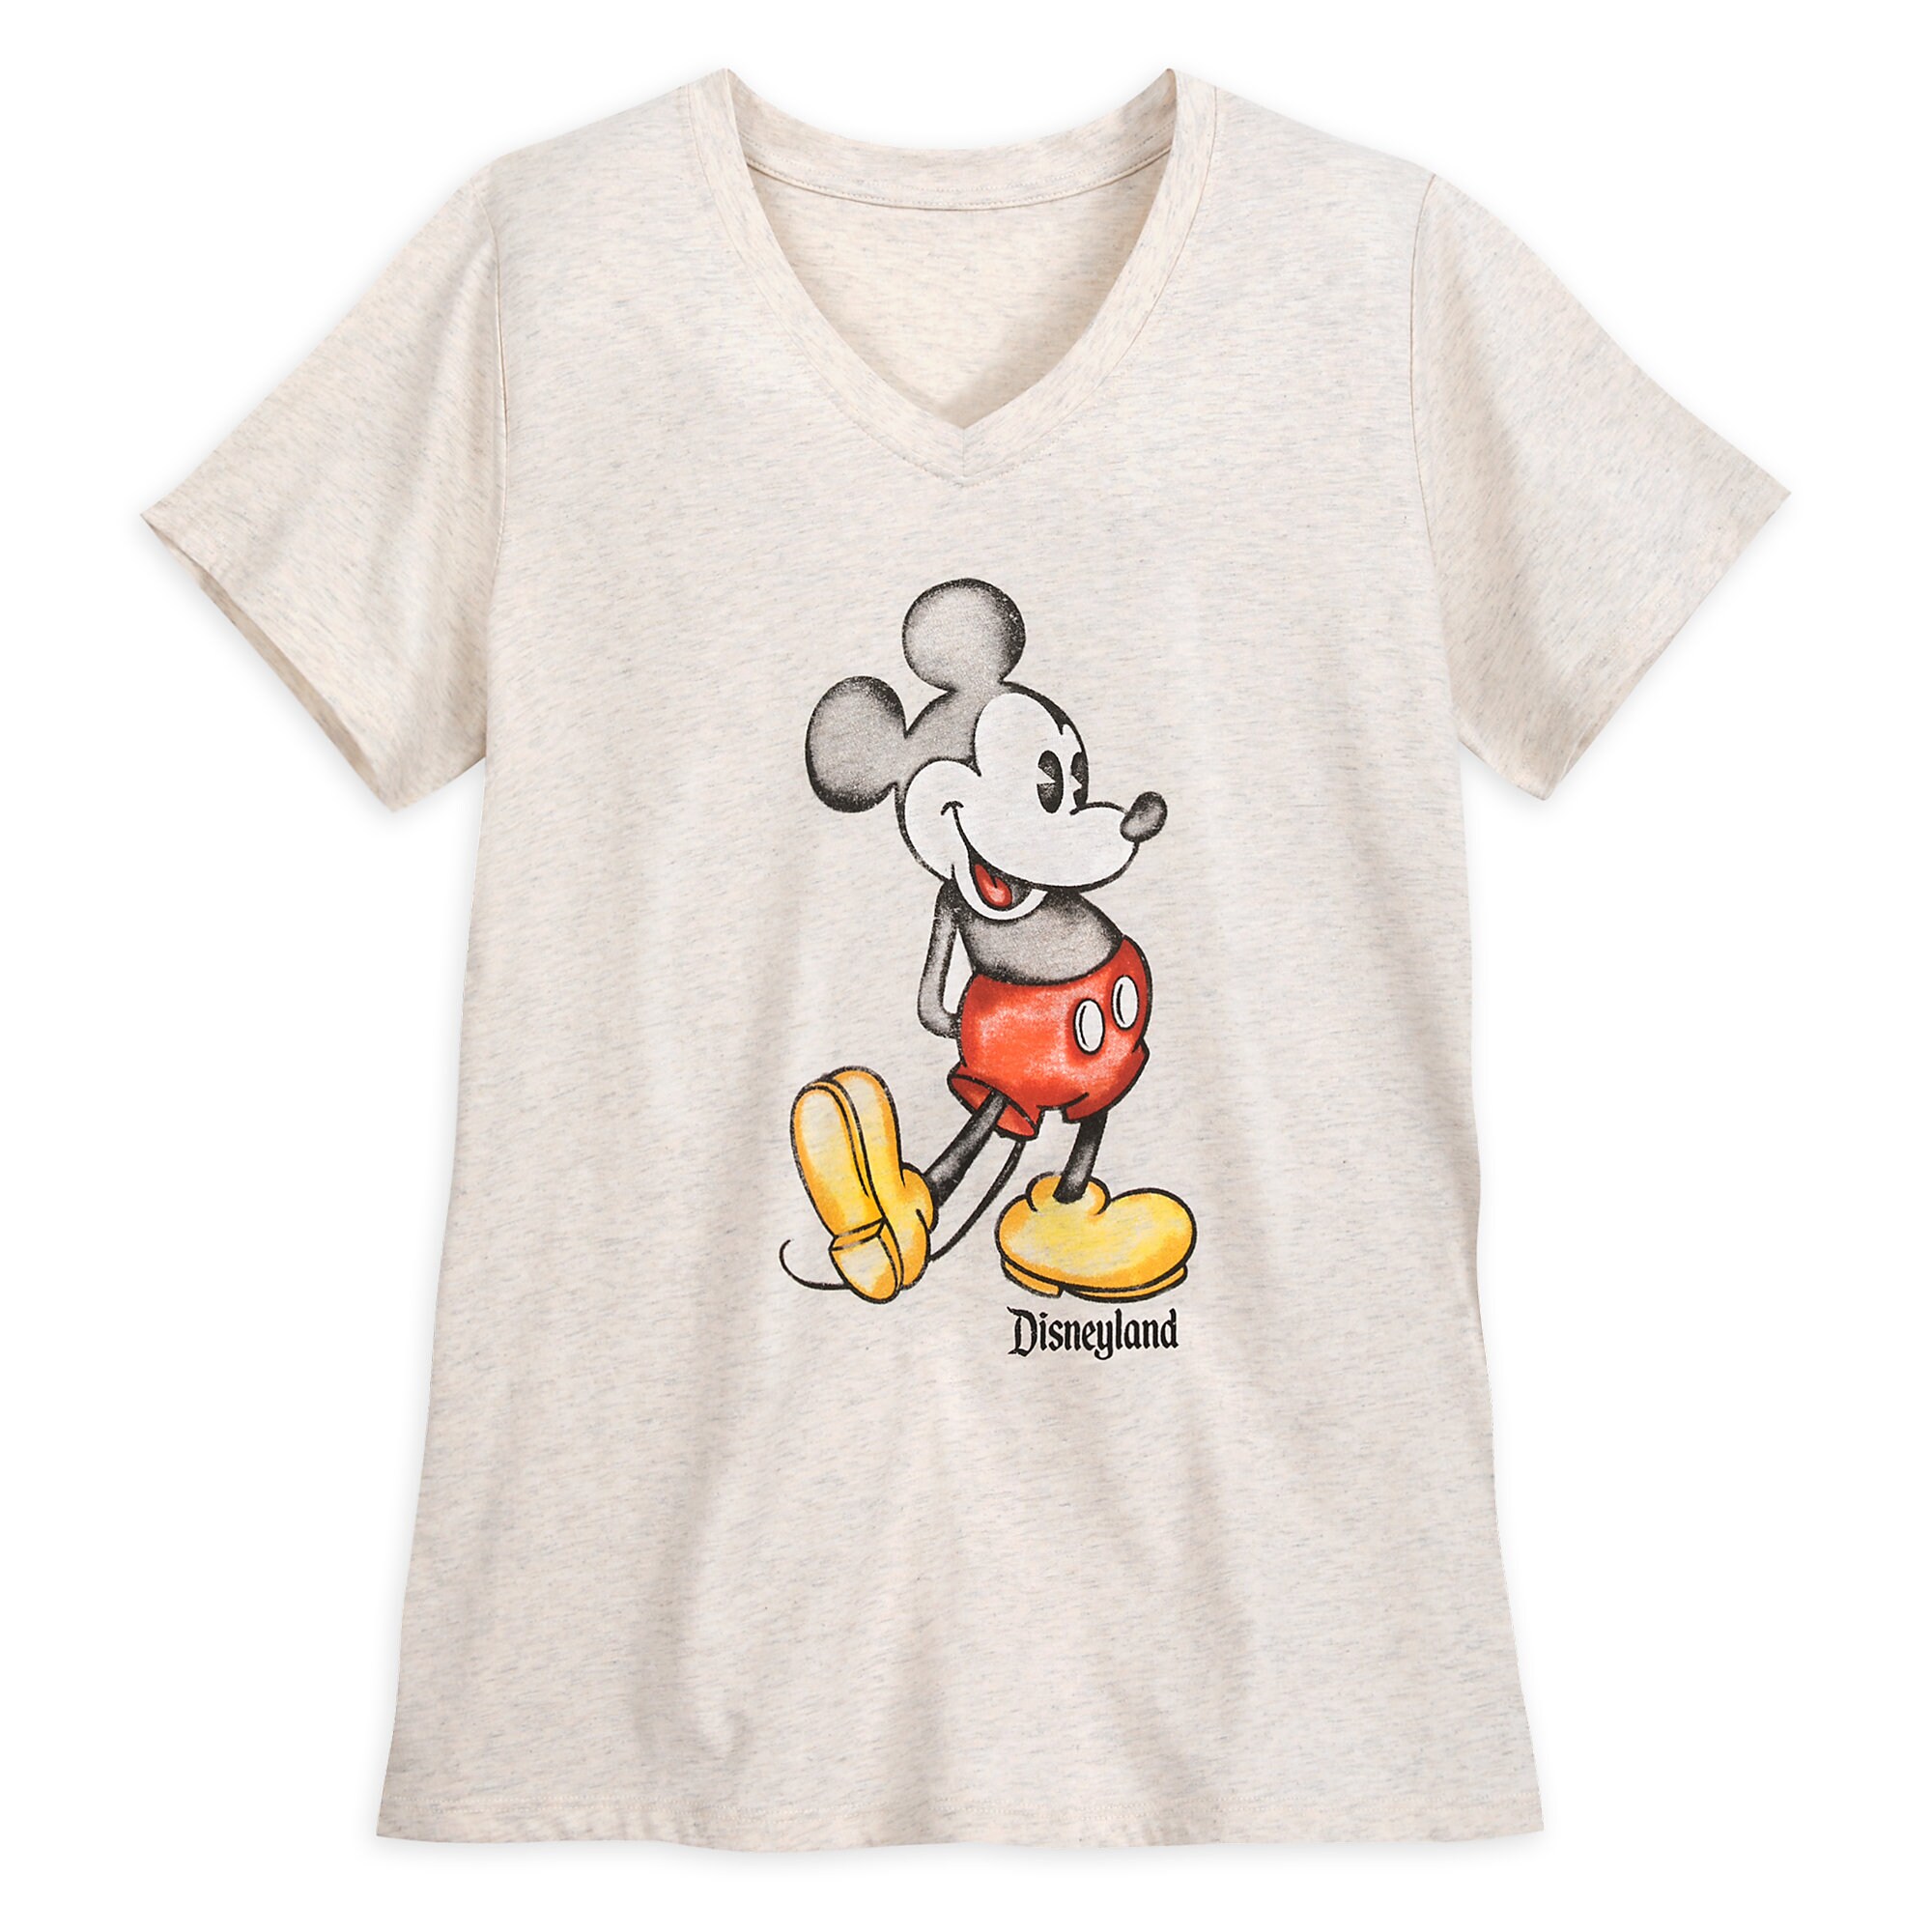 Mickey Mouse Heathered V-Neck T-Shirt for Women - Disneyland - Oatmeal